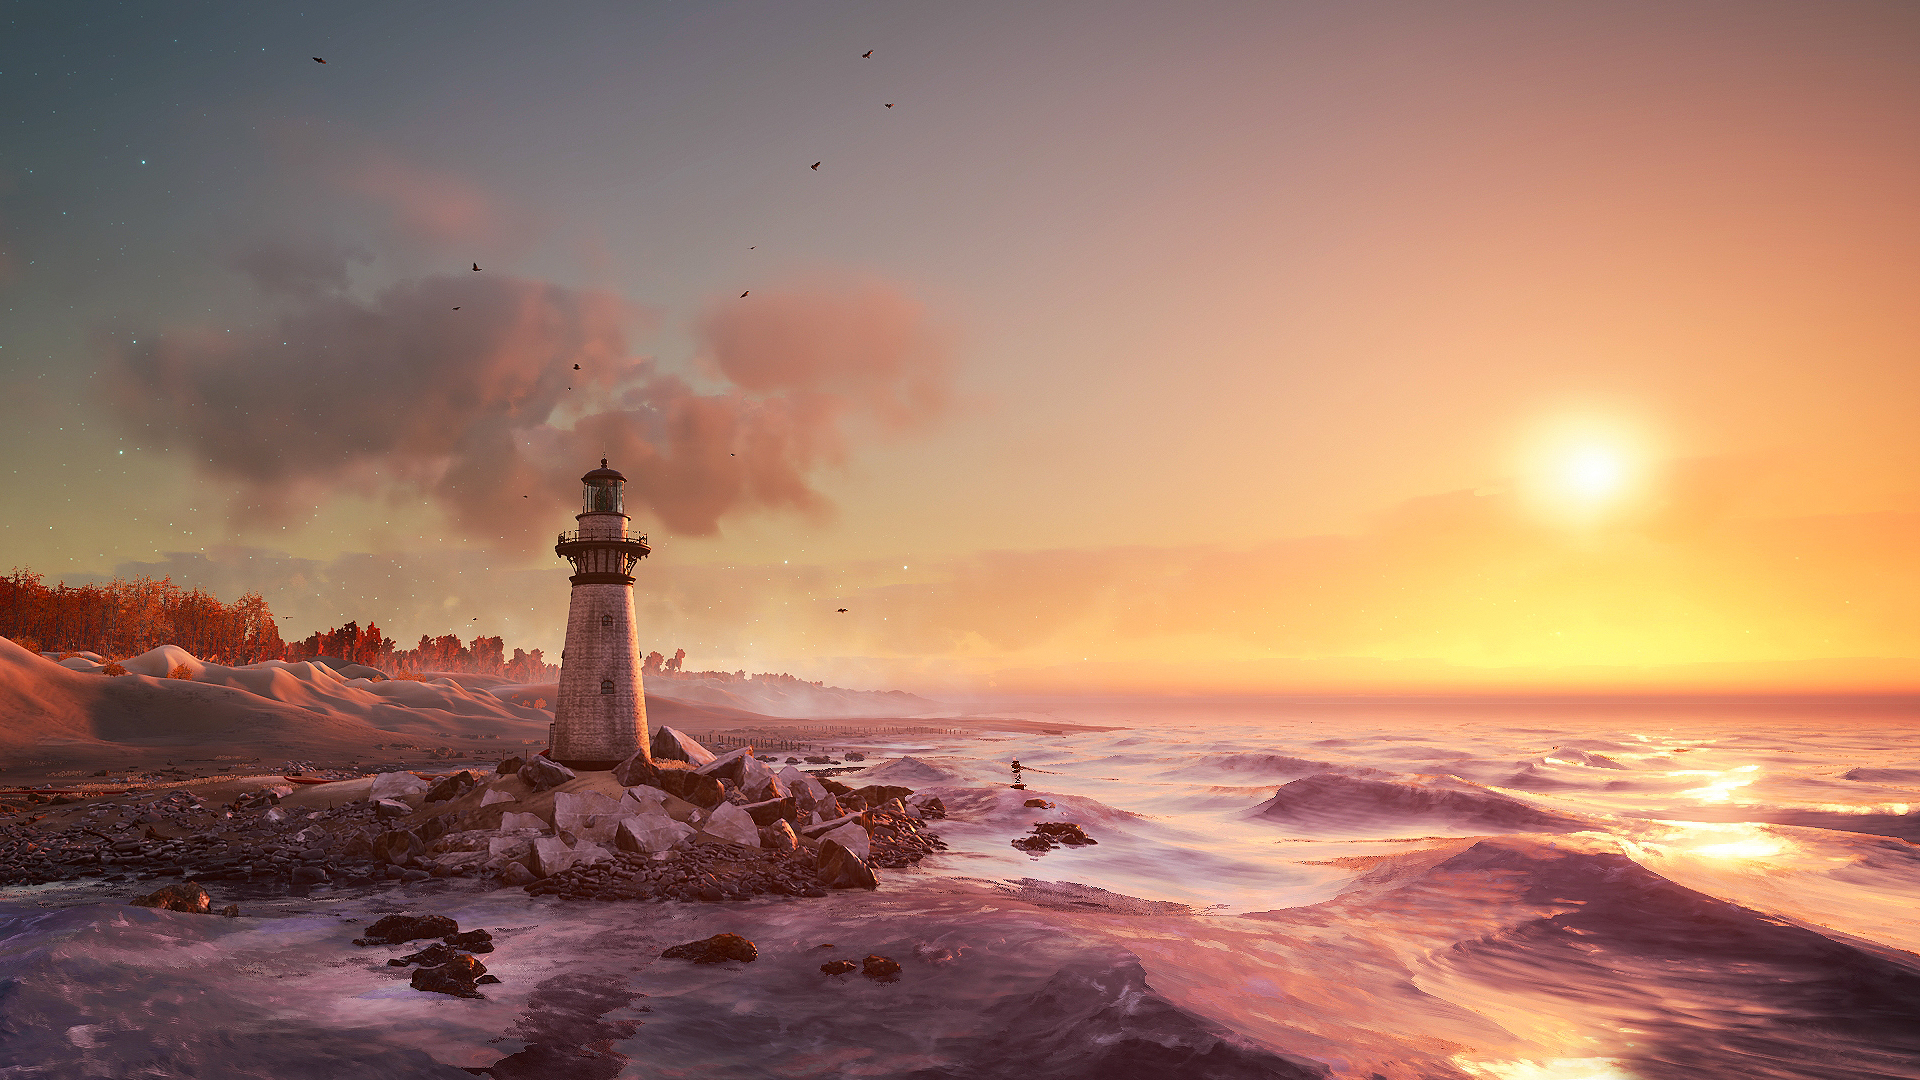 Unreal Engine 4 Wallpapers